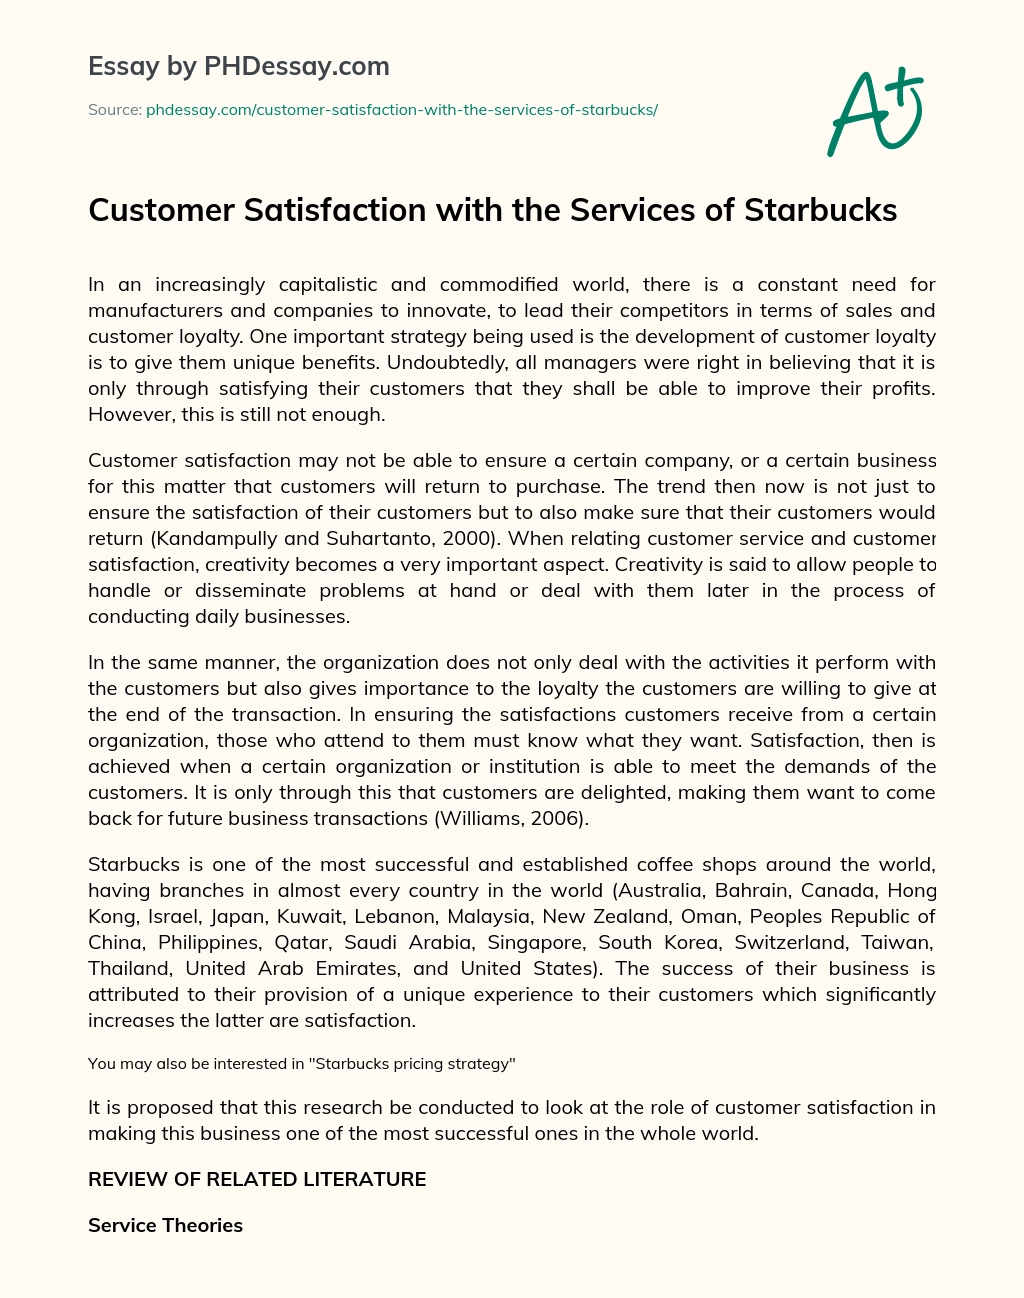 Customer Satisfaction with the Services of Starbucks essay